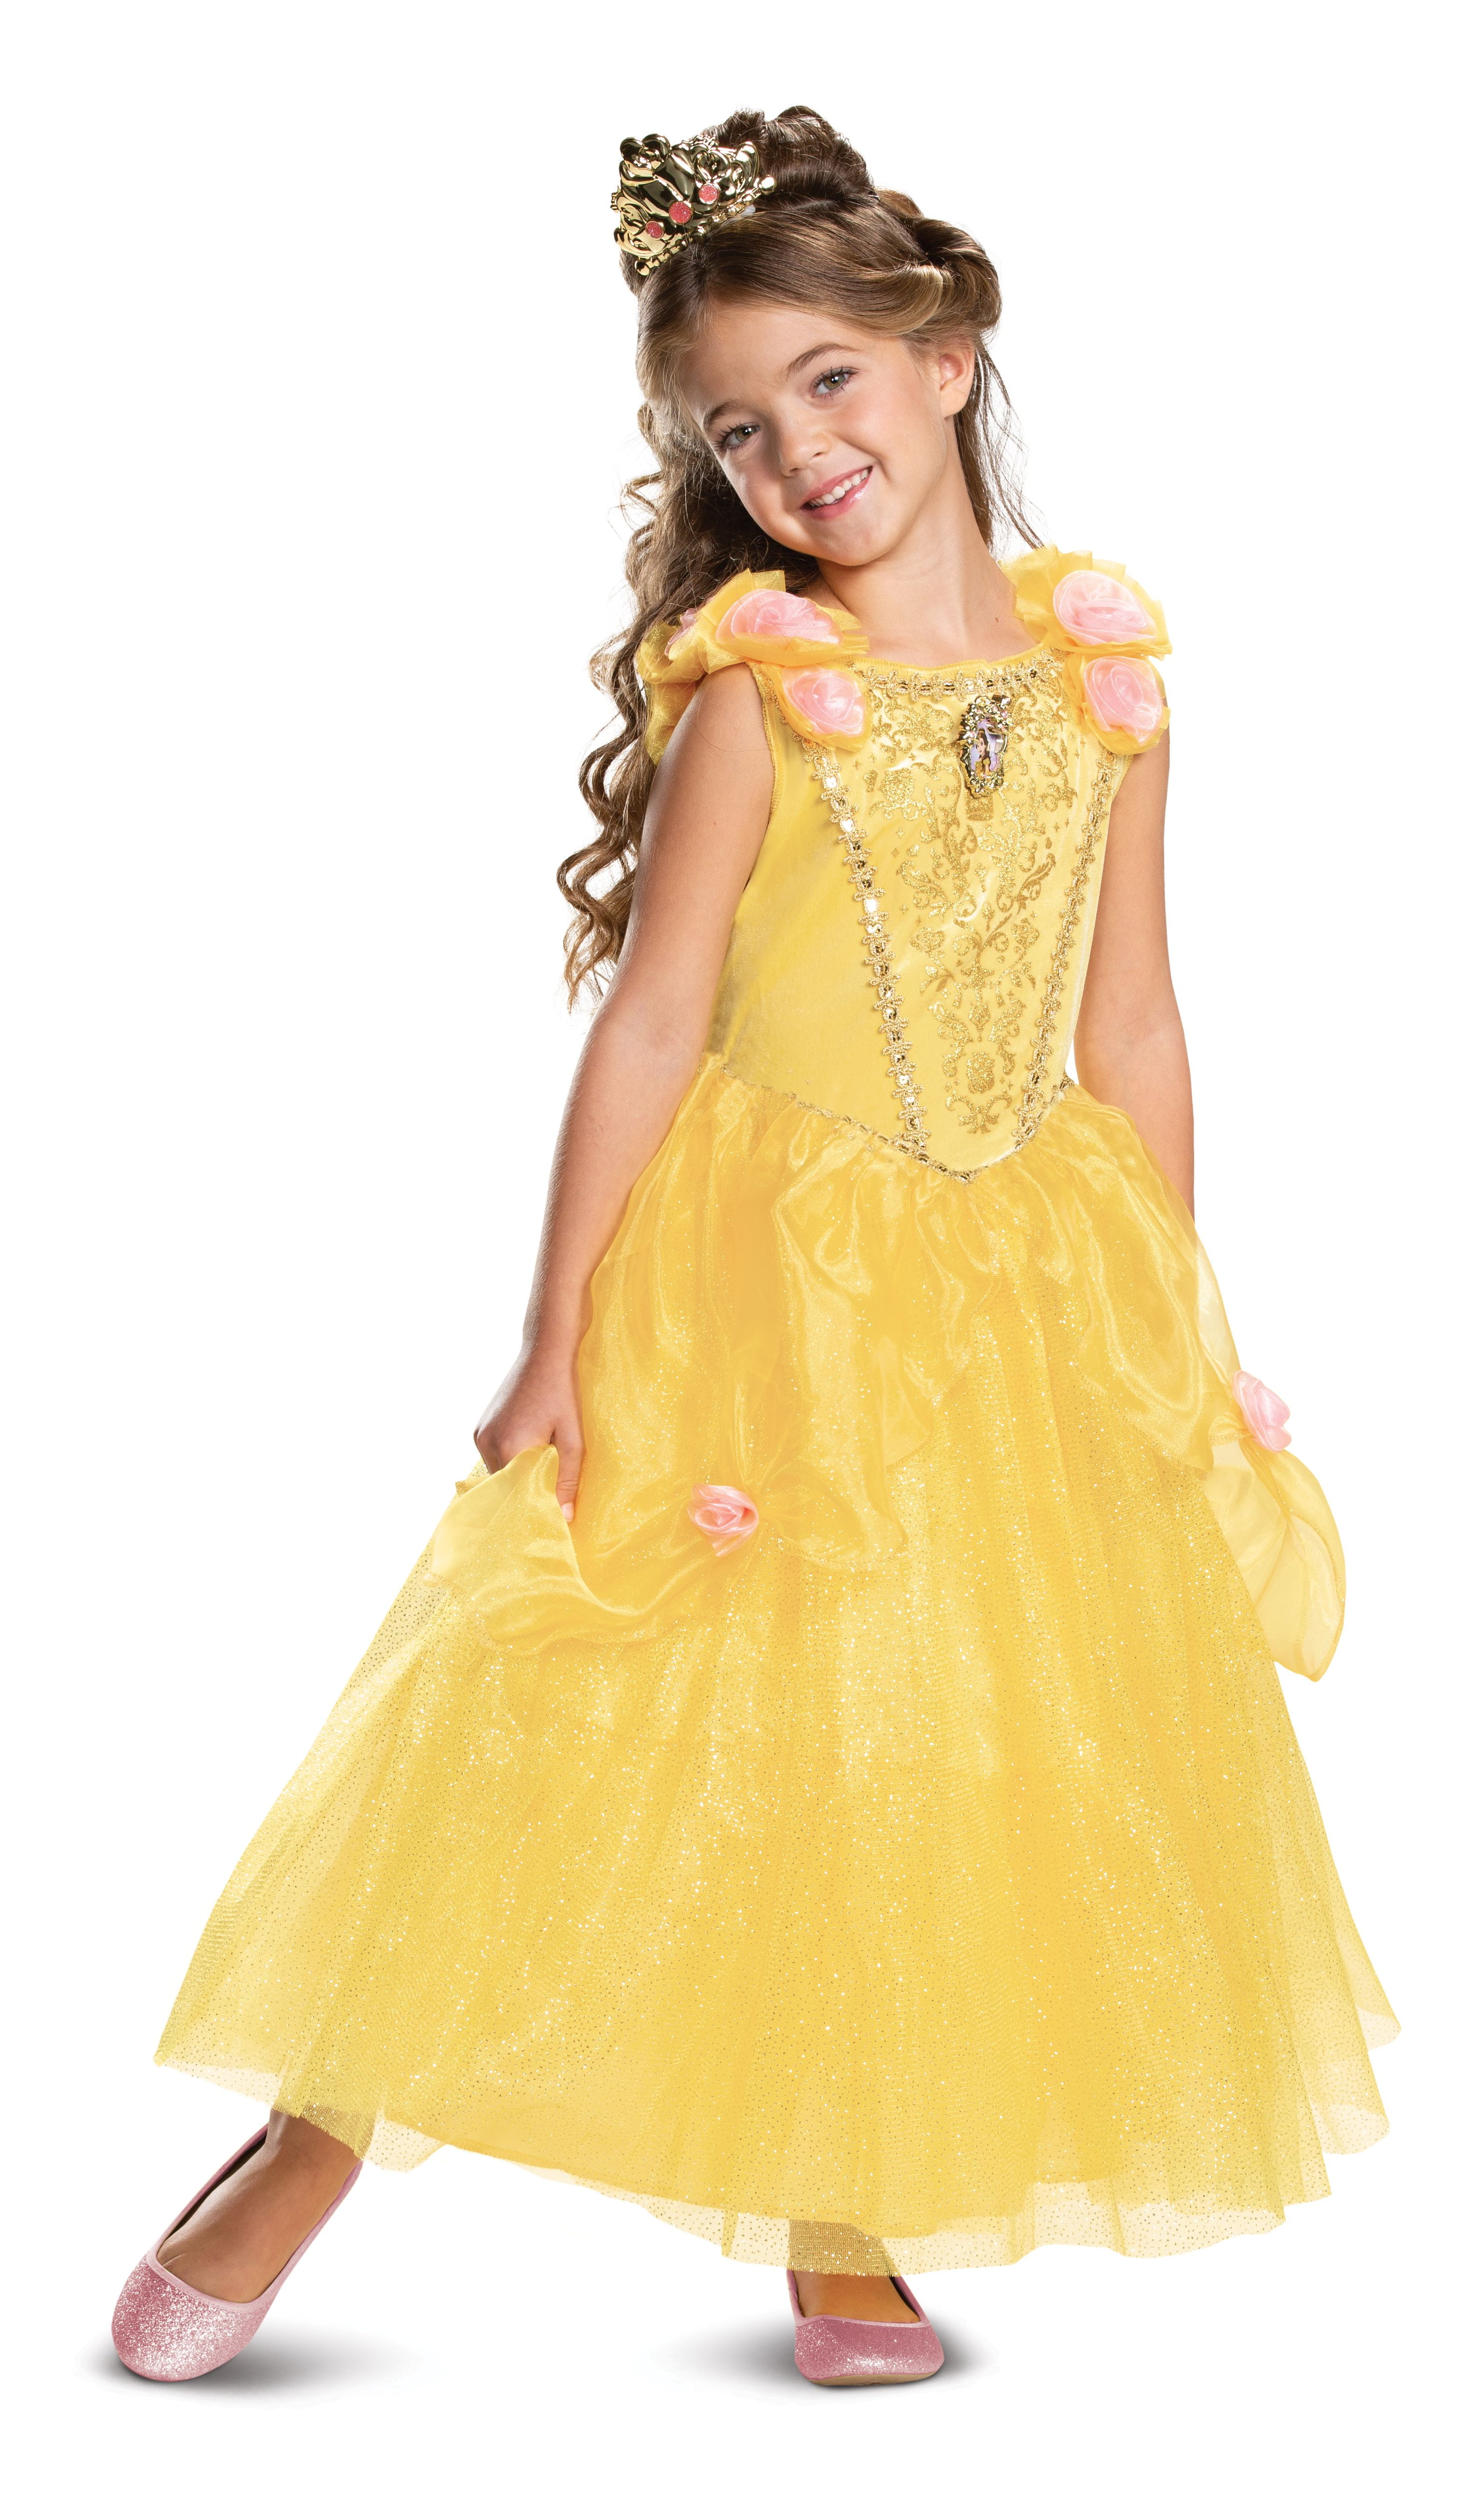 Belle Disney princess Onesie and skirt w free headband bow Tale as old as time. Beauty and the Beast baby outfit gift set Free shipping